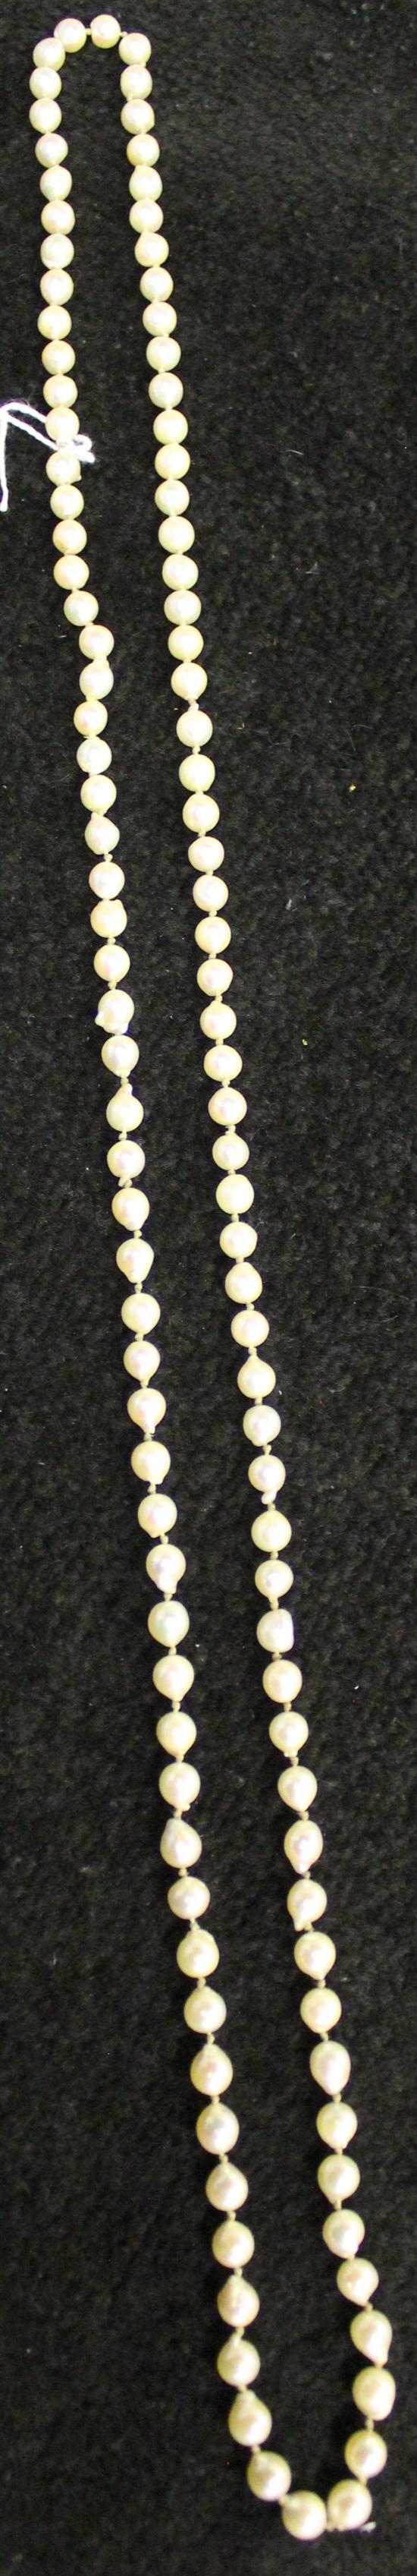 Mikimoto long necklace of uniform pearls